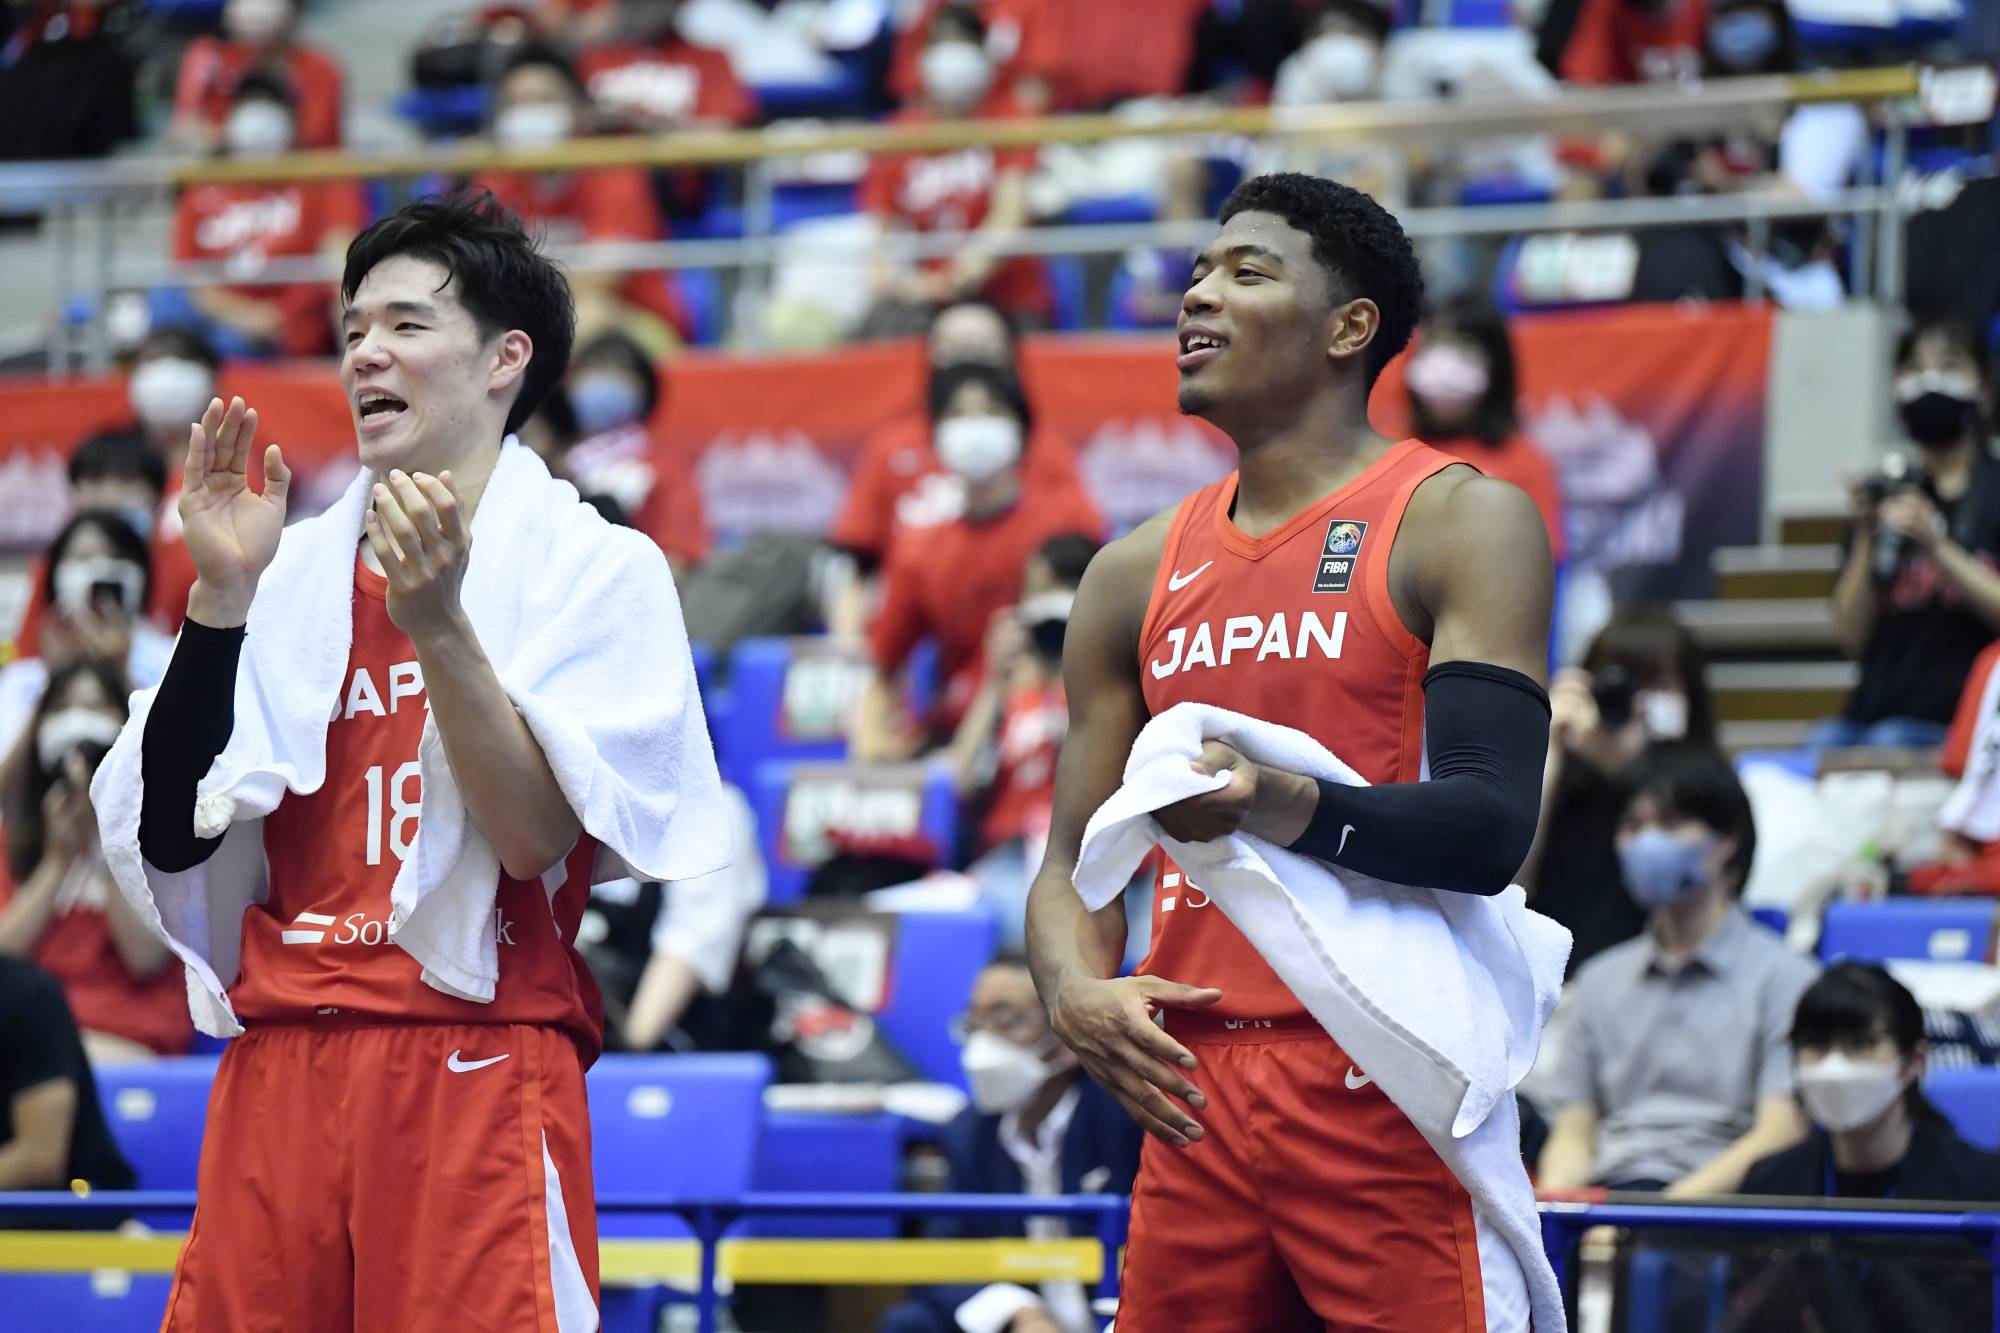 Olympics: Rui Hachimura hapless as Japan hoops dream ended by Argentina